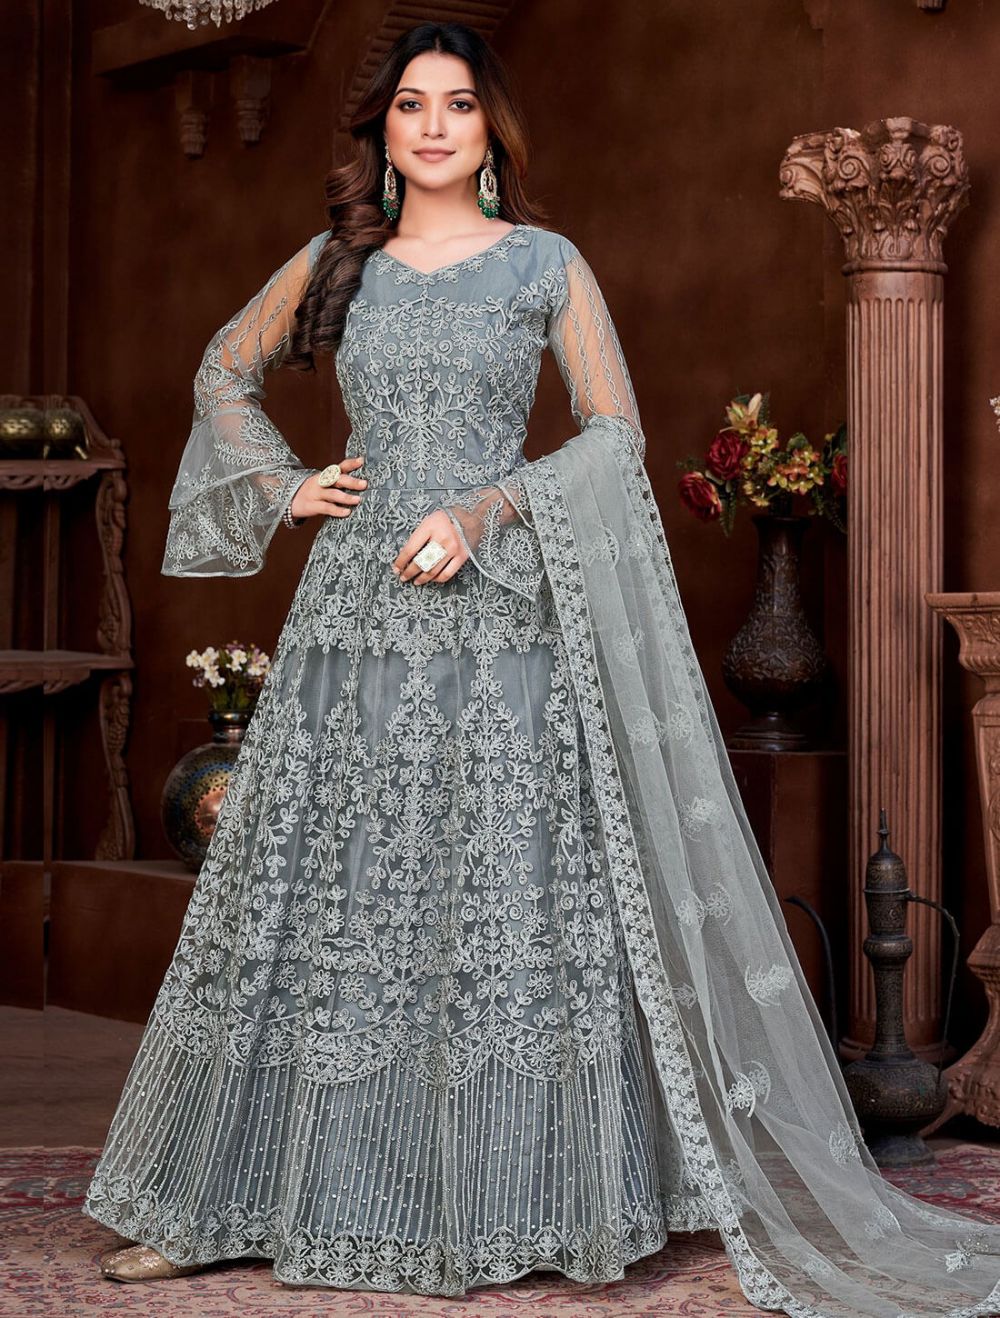 Trendiest Anarkalis For Sikh Brides That Will Mesmerise You | Bridal anarkali  suits, Indian bride outfits, Sikh bride